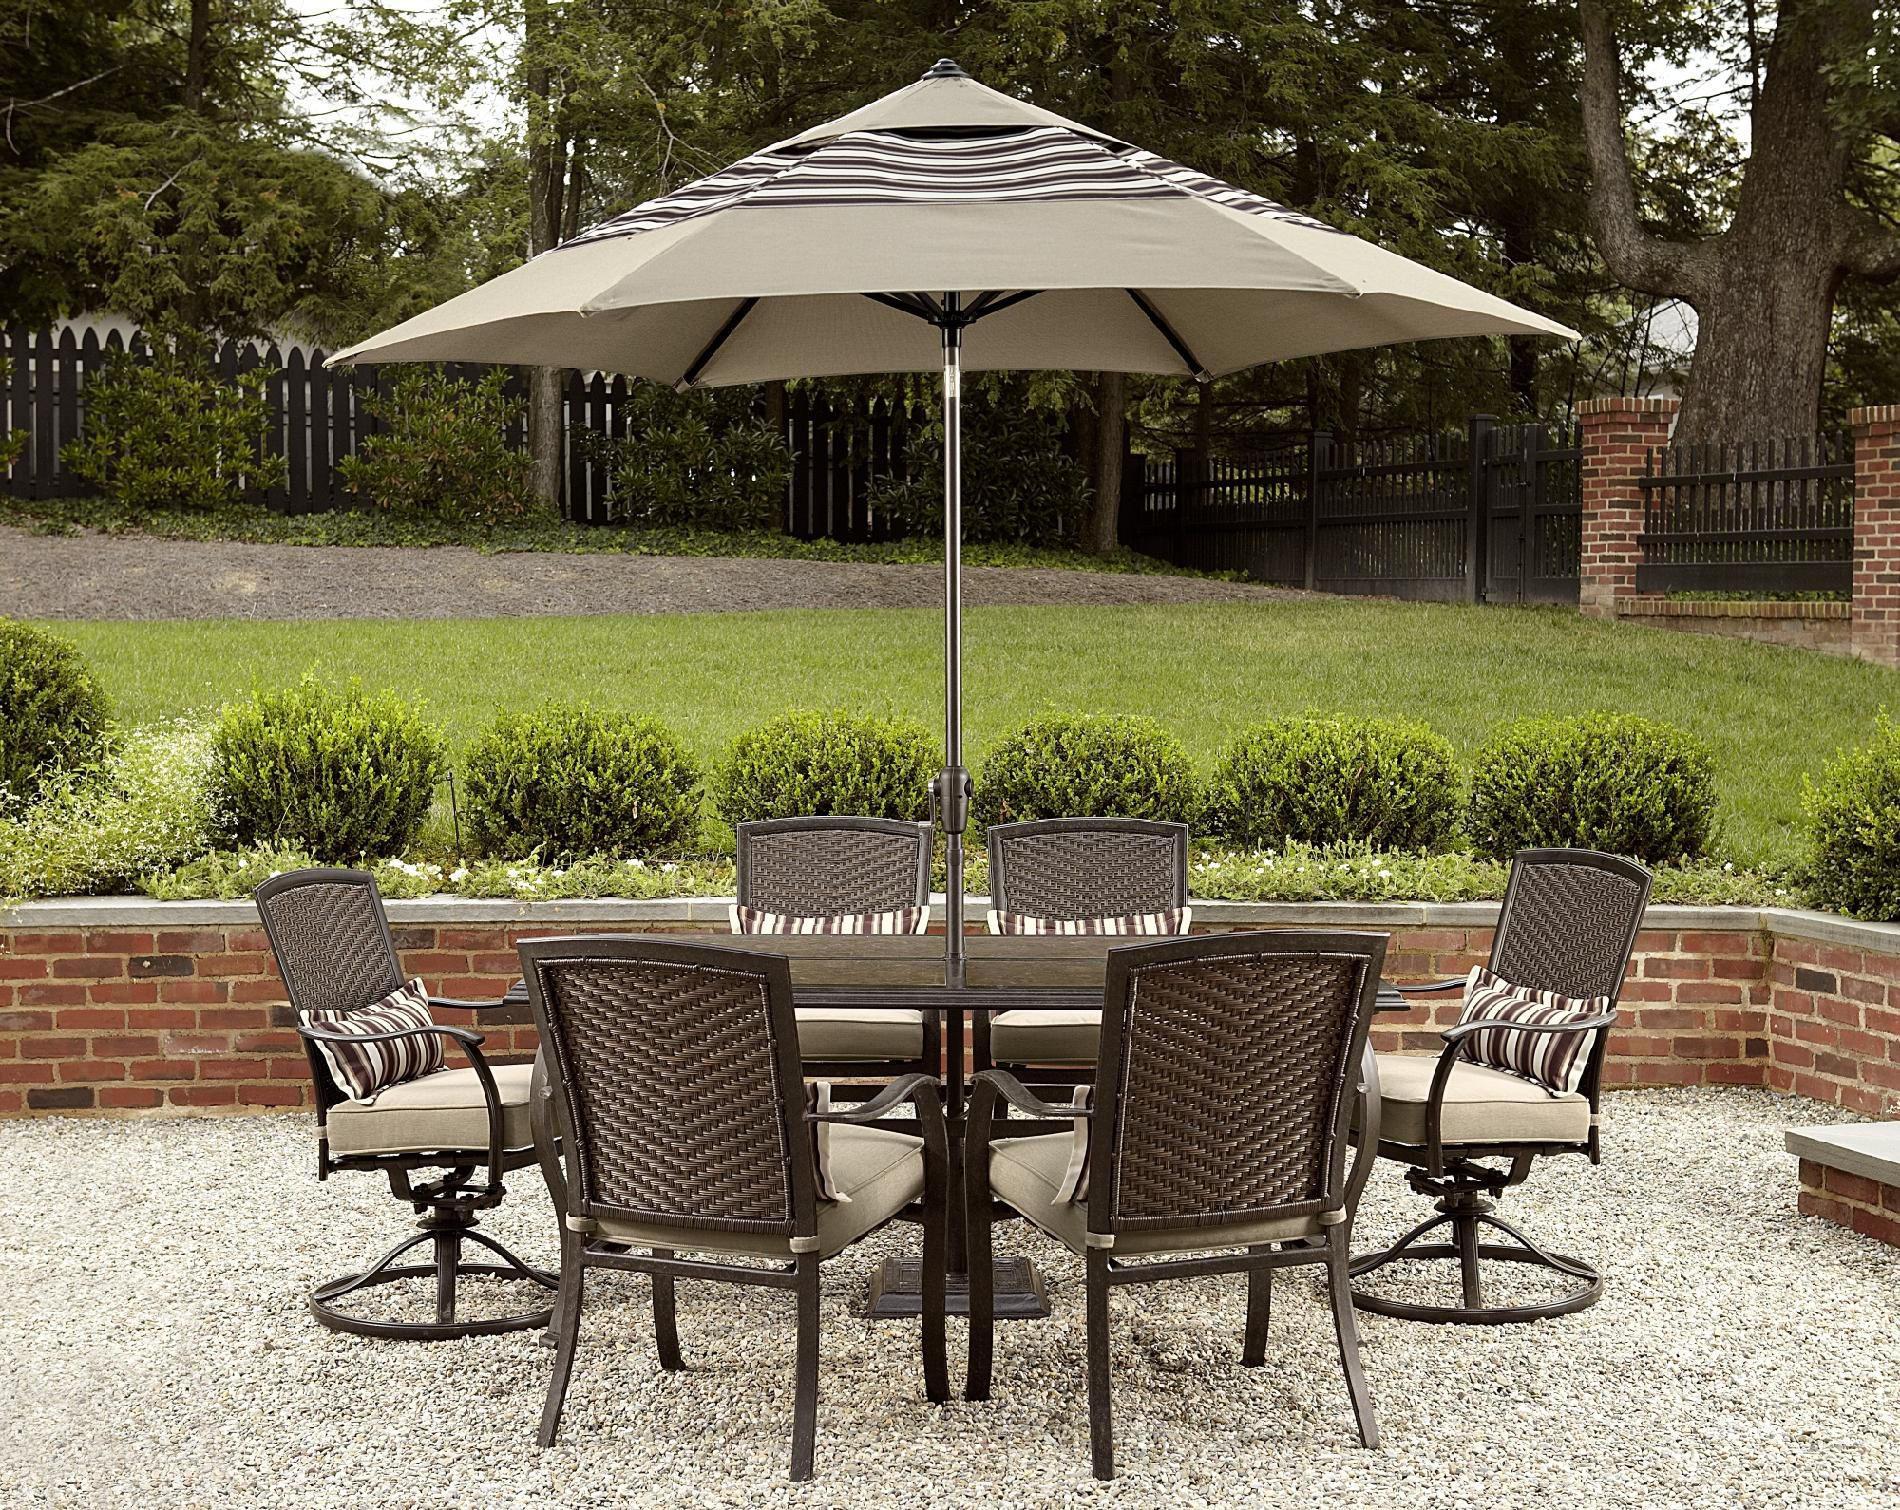 Cheap Backyard Furniture
 Patio Sears Outlet Patio Furniture For Best Outdoor